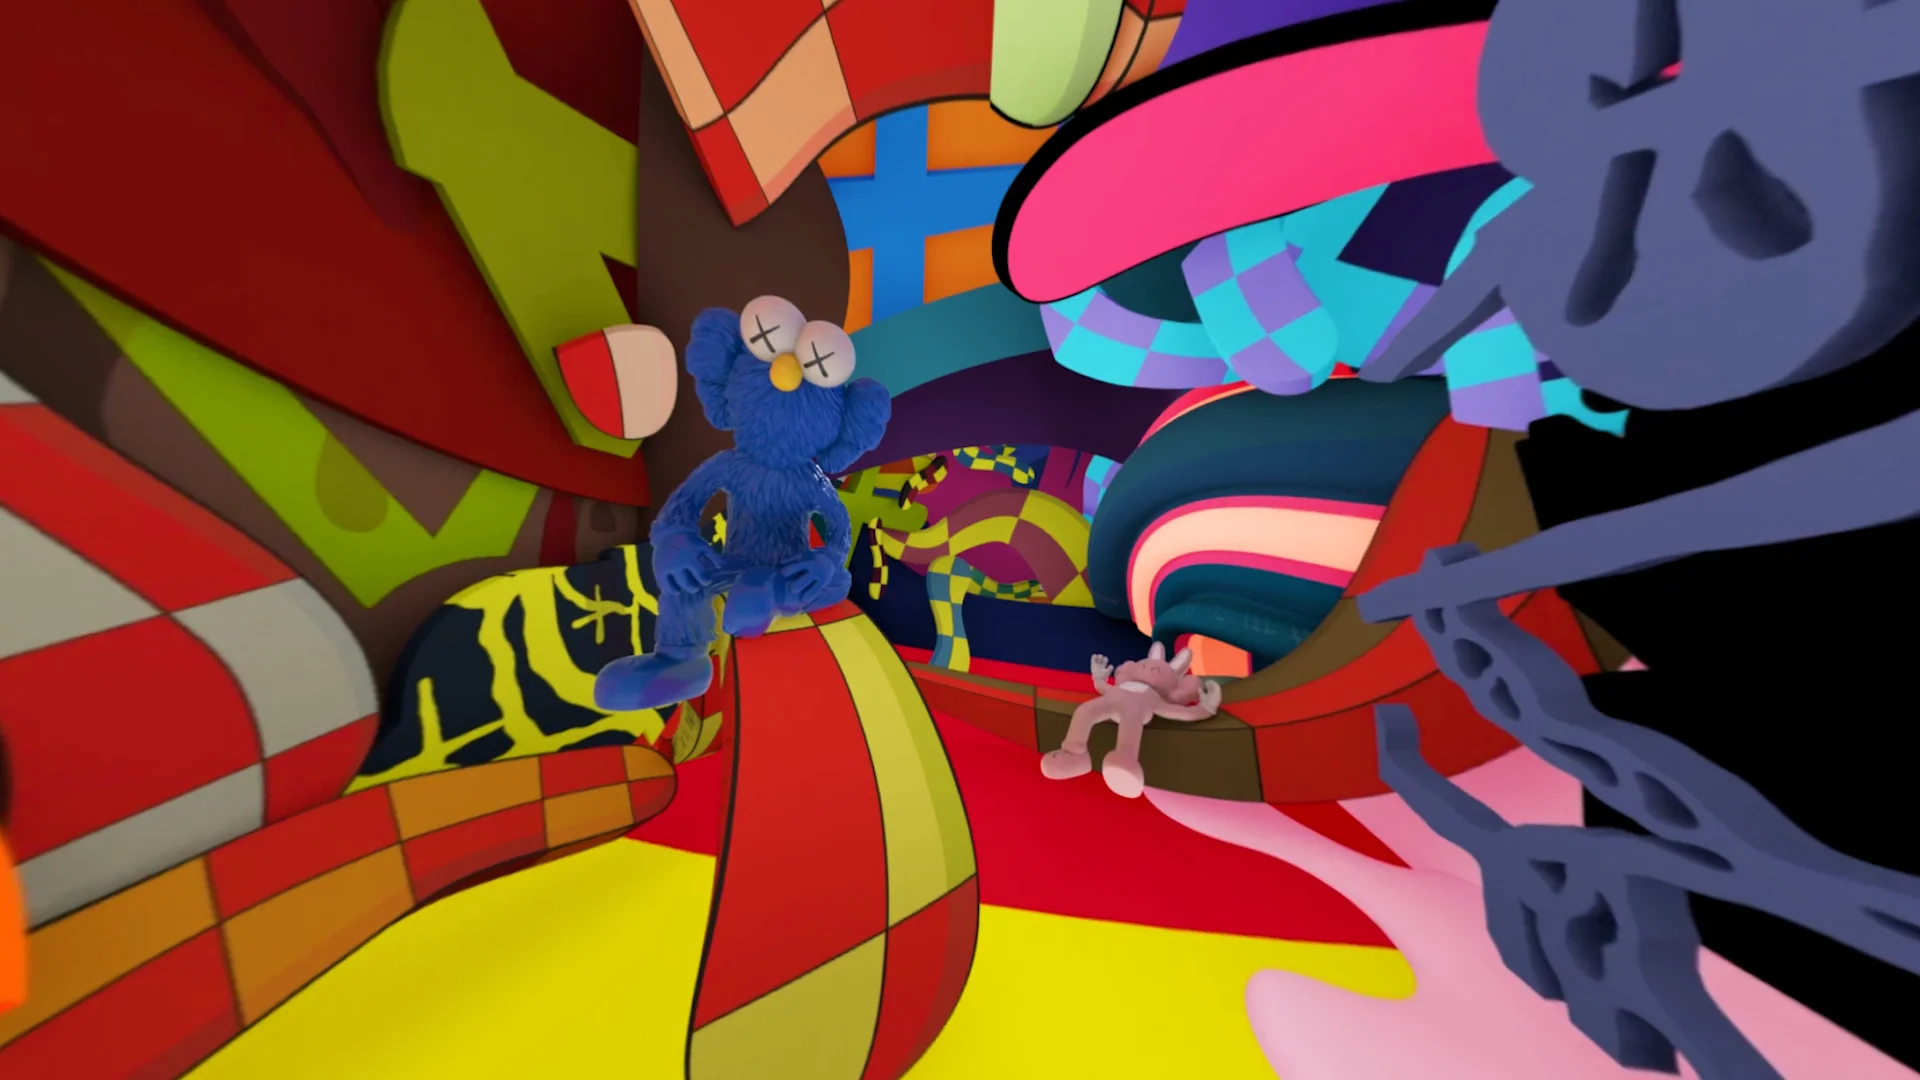 Visionaire Presents KAWS a VR Experience teaser on Vimeo